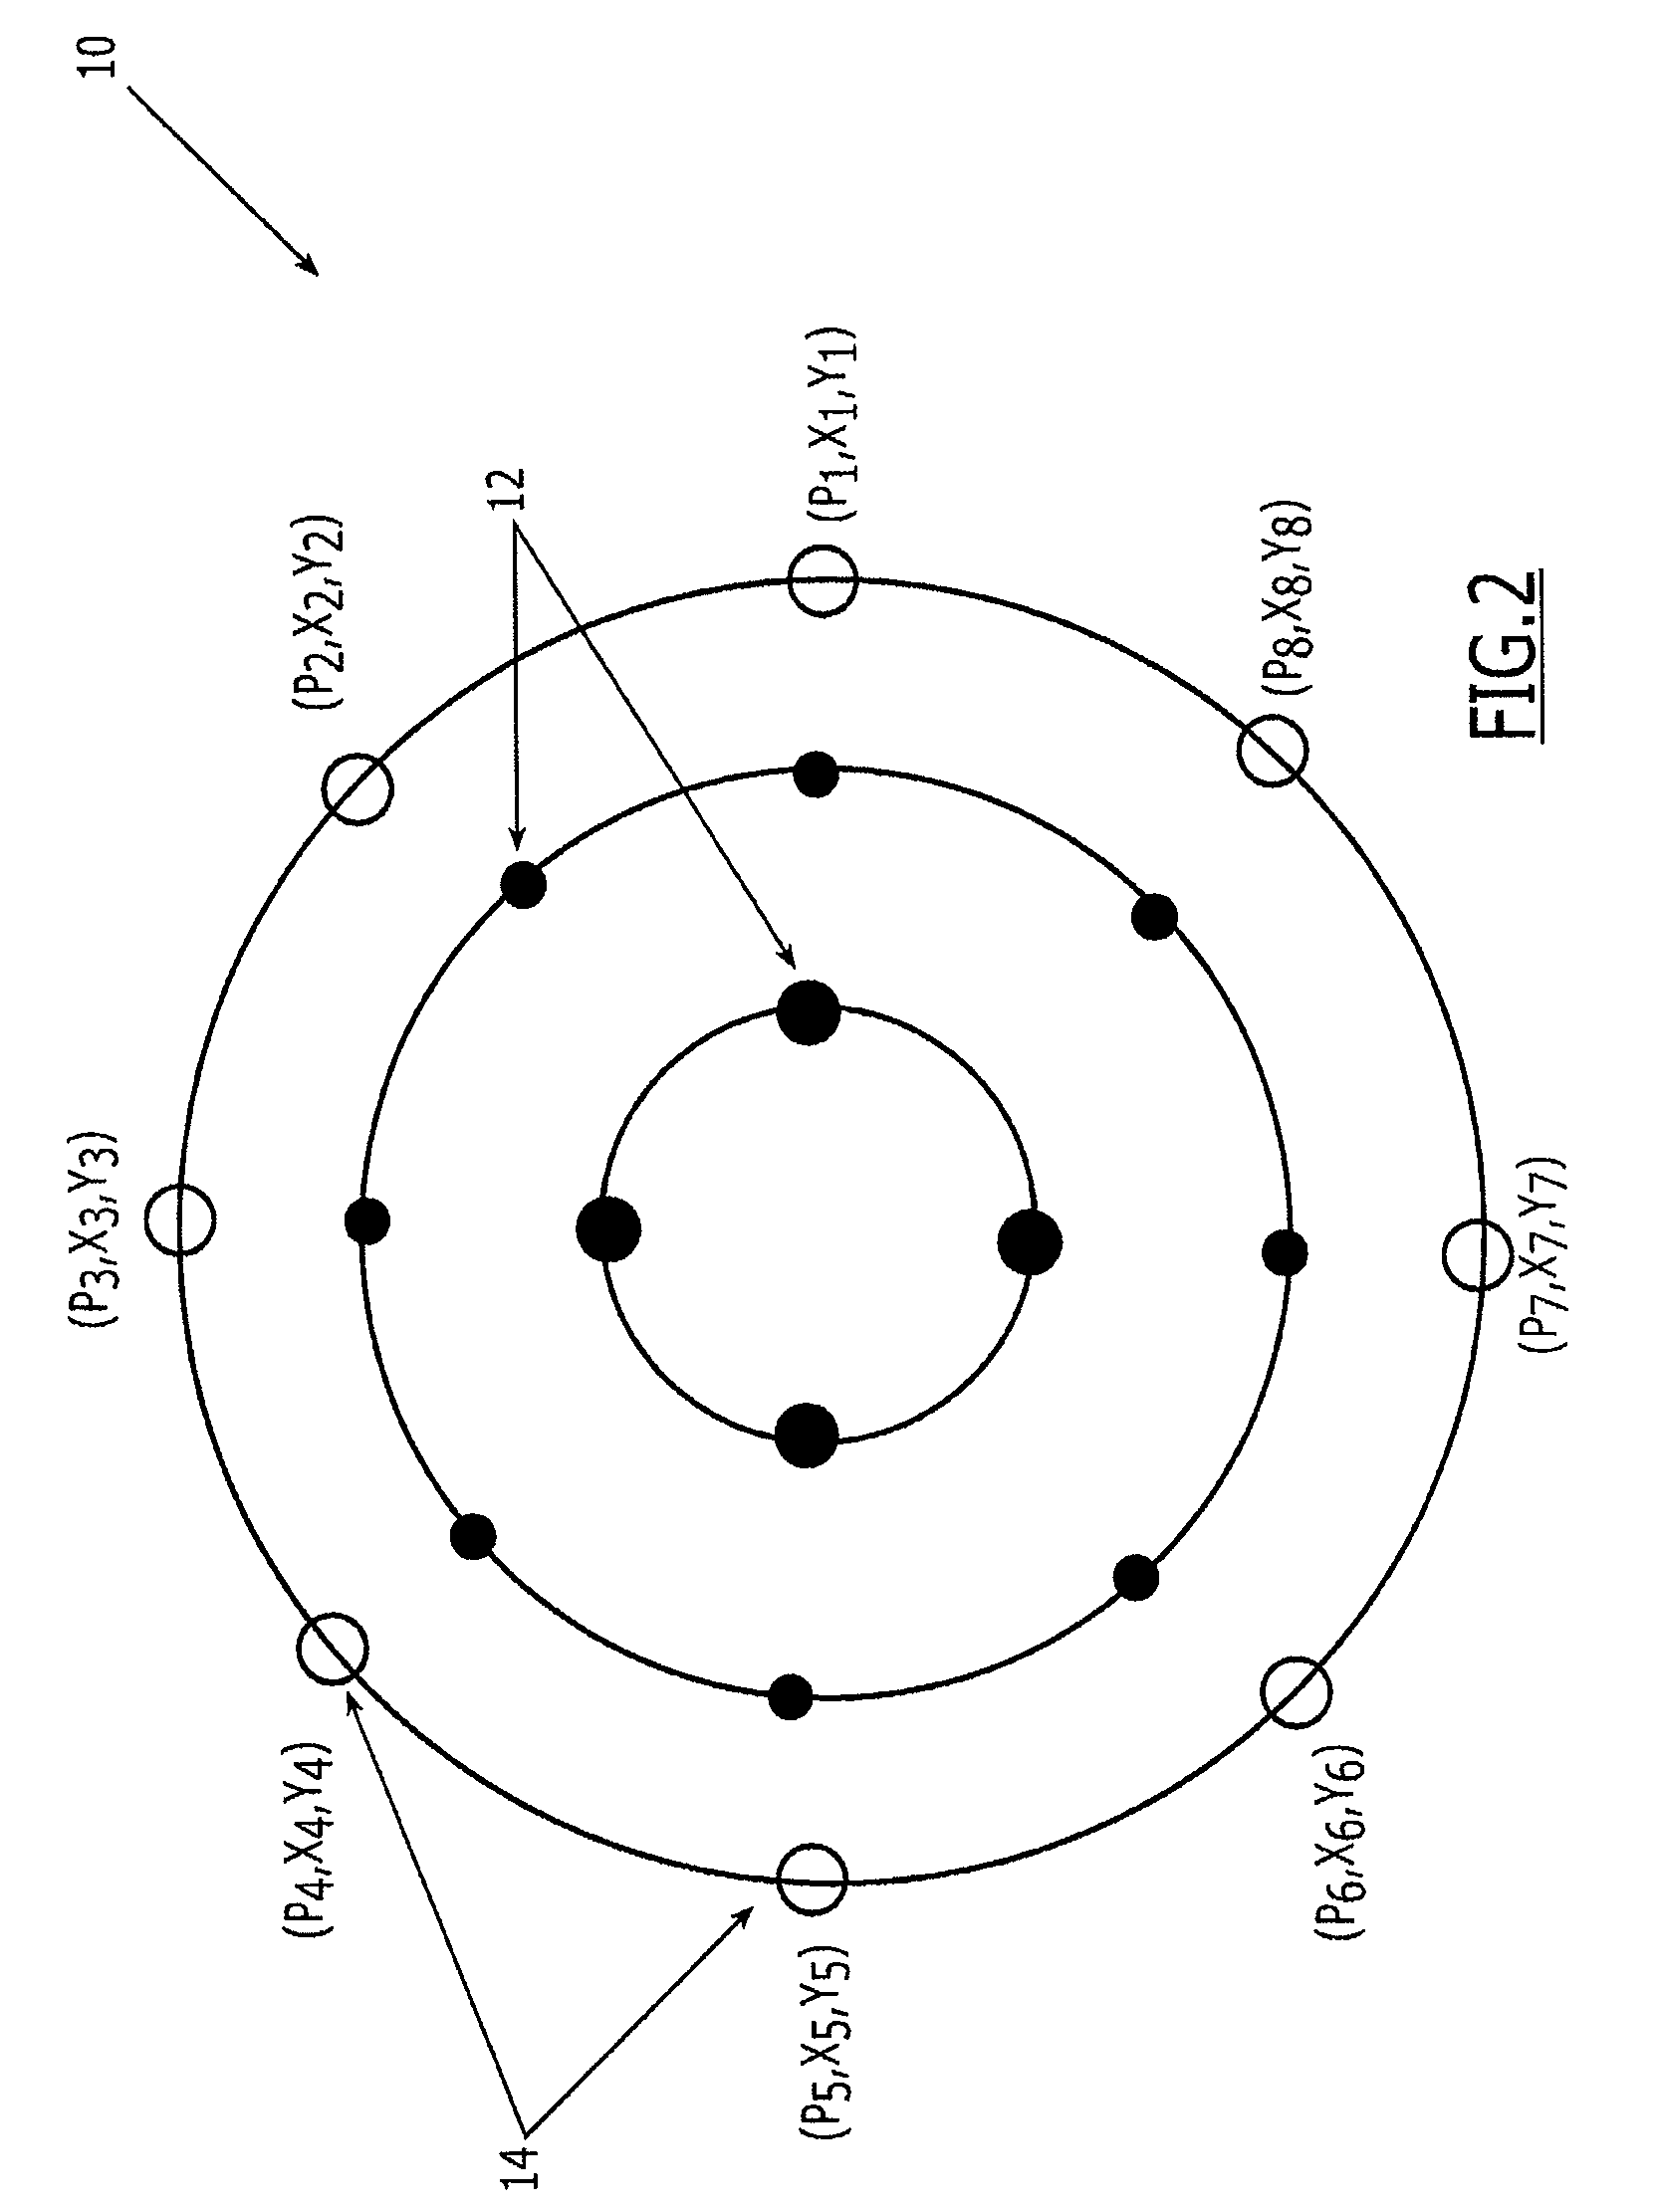 System and method for determining the beam center location of an antenna